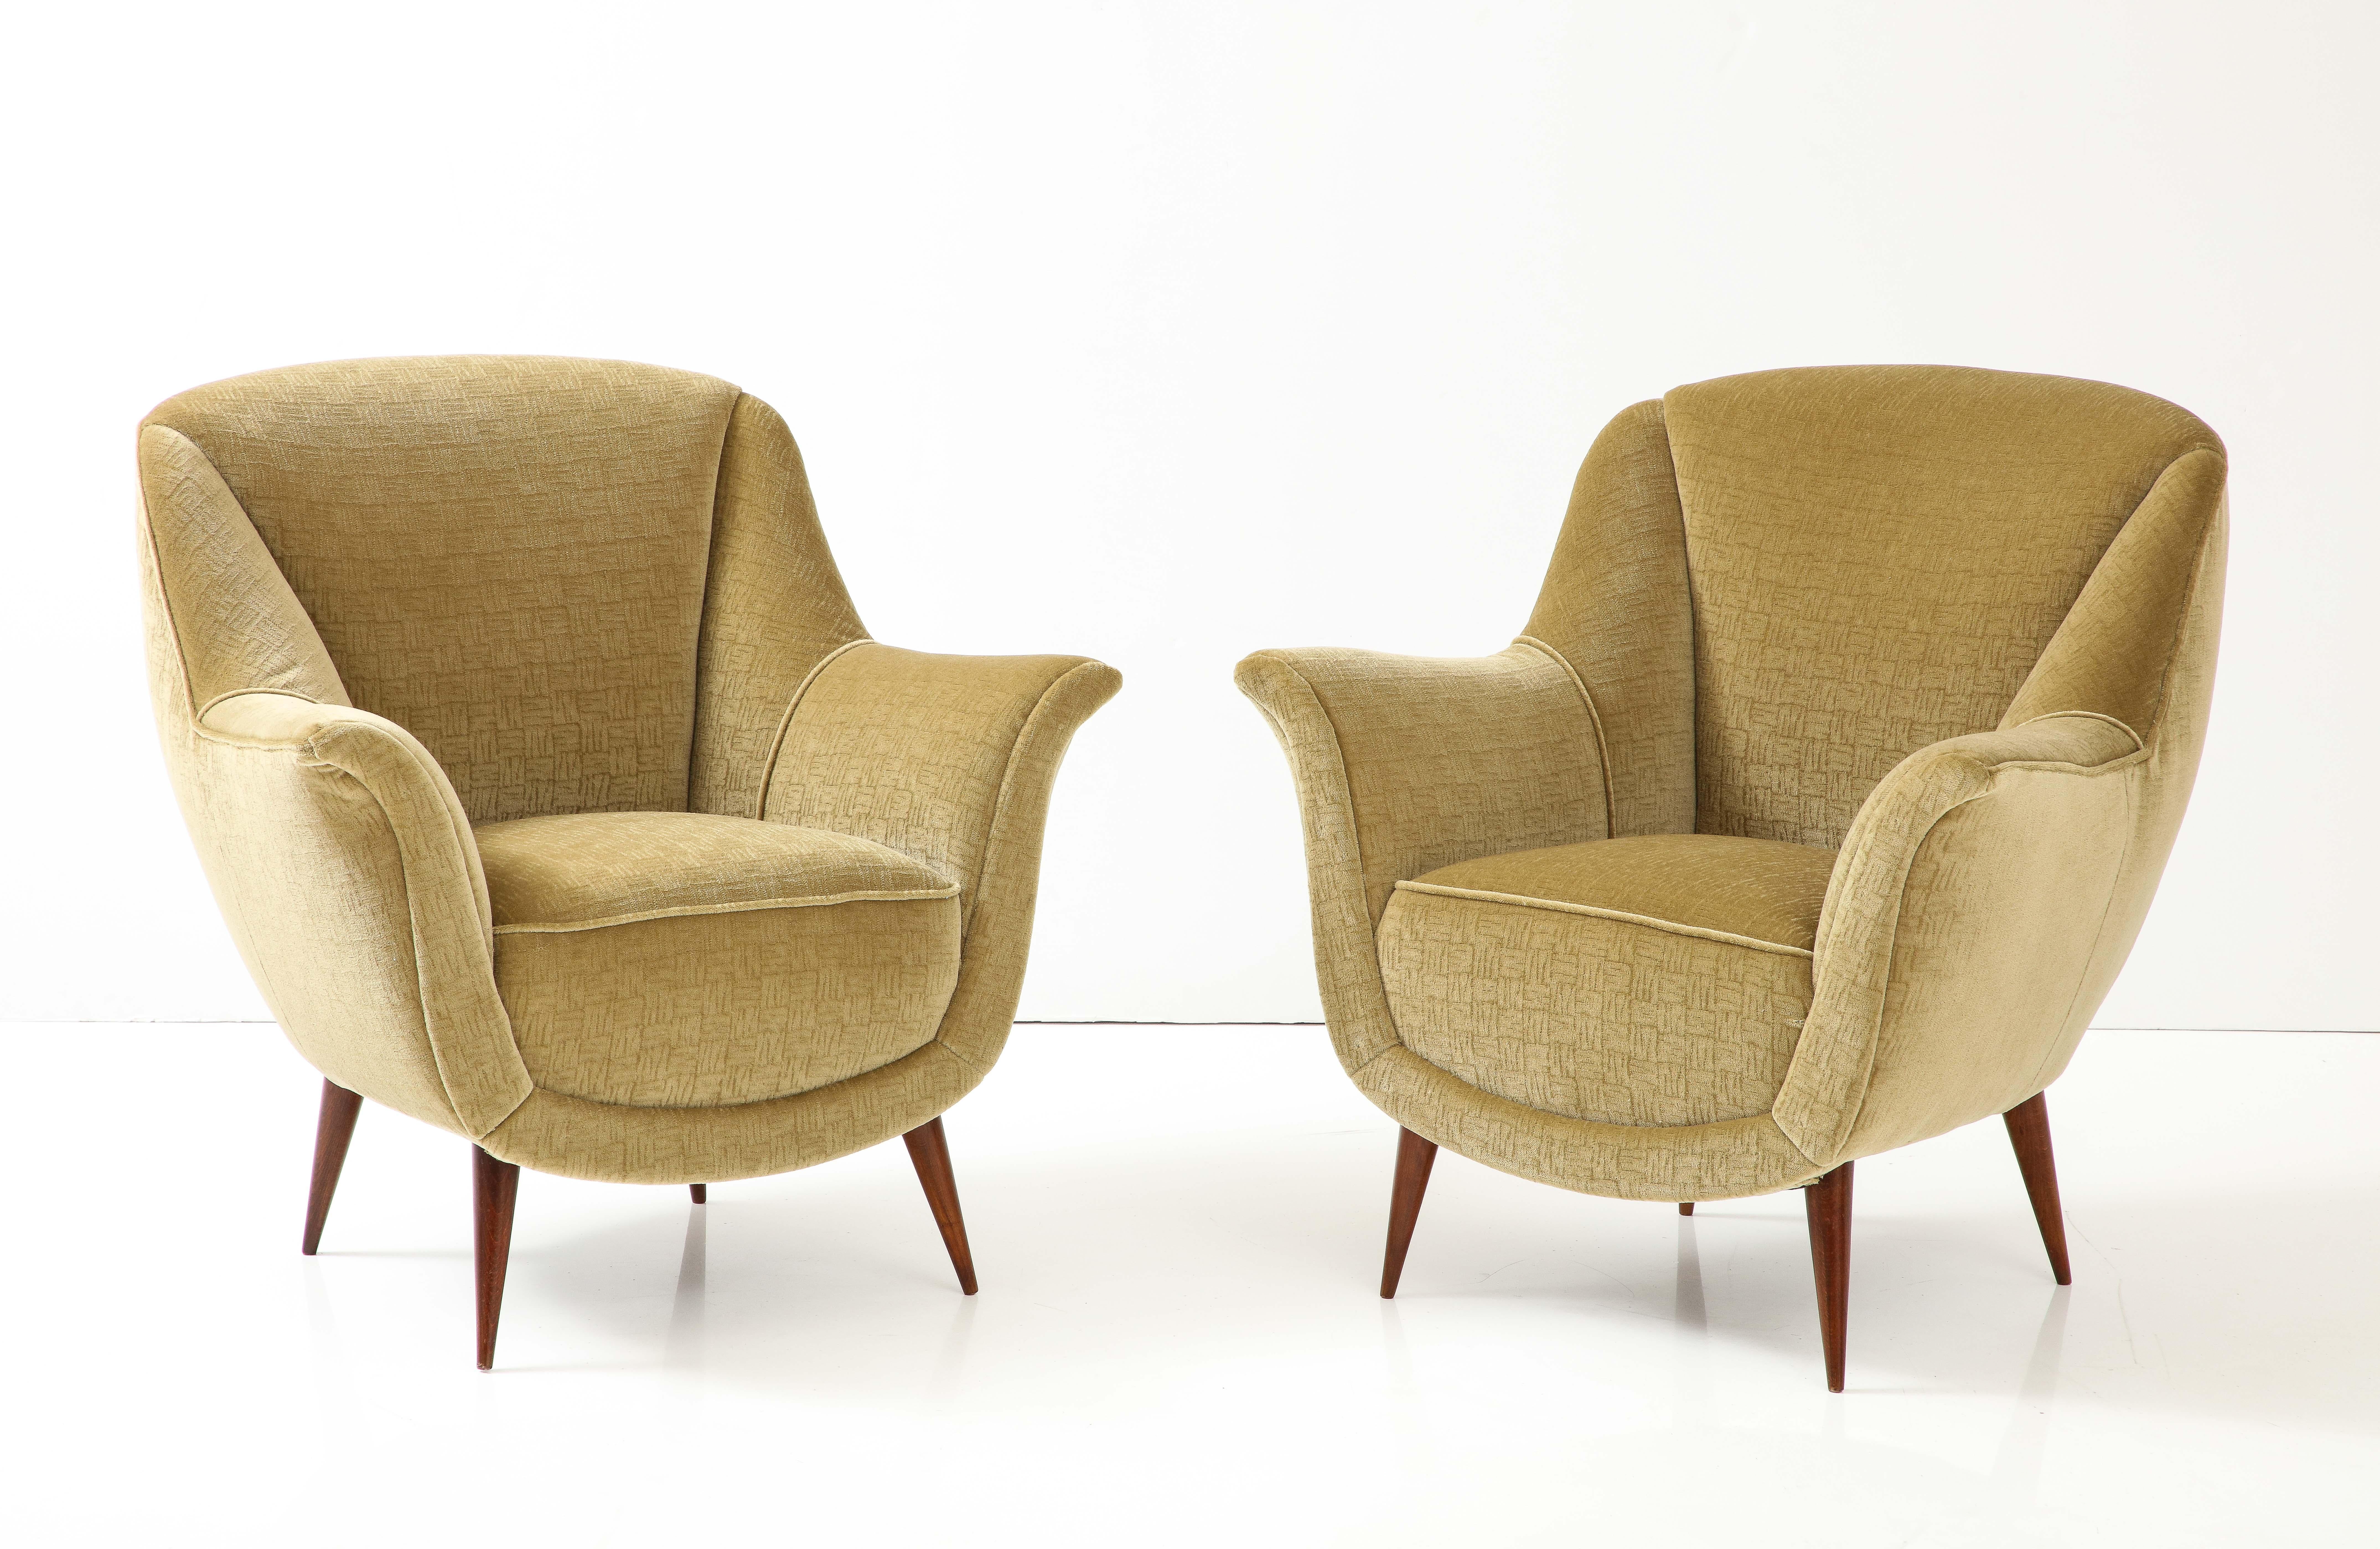 1950's Modernist Gio Ponti Style Italian Lounge Chairs In Mohair Polsterung im Angebot 4